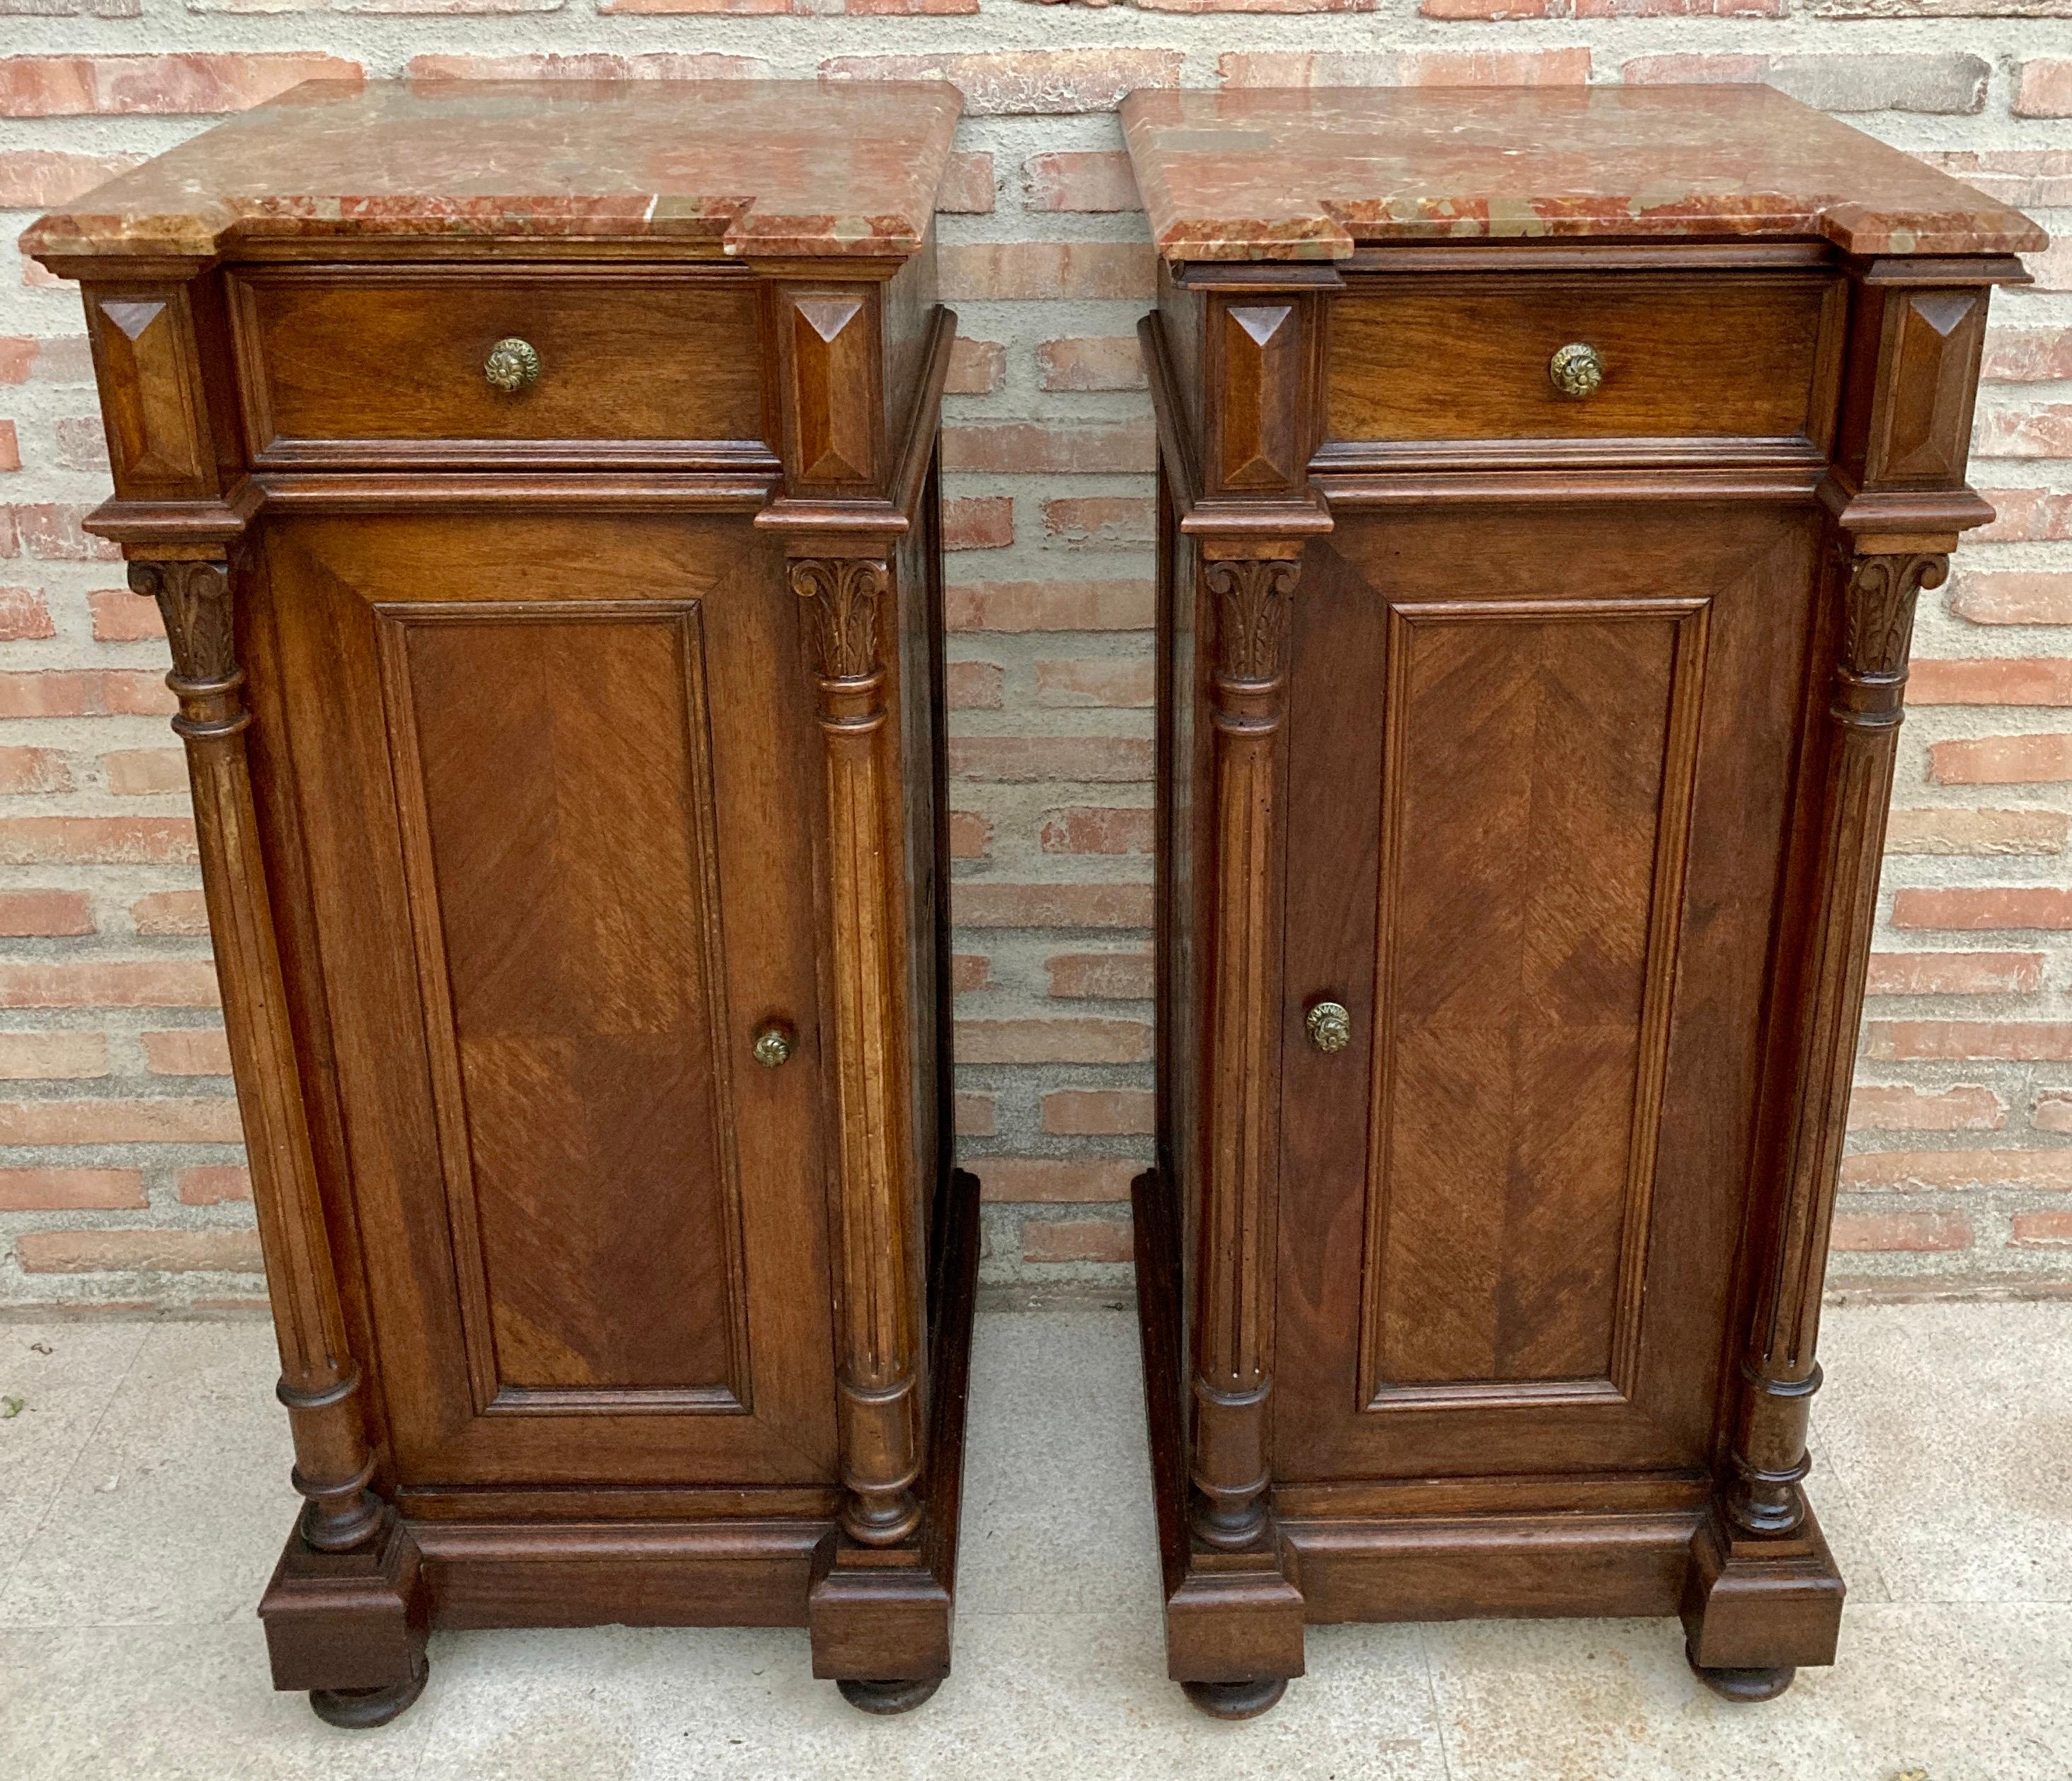 Pair of French Louis XVI side cabinets with side columns with acanthus leaf decoration, late 19th century.
Red marble top.
Bedside tables with a drawer and a front door with an interior shelf.
Good old condition with small signs of use for its age.